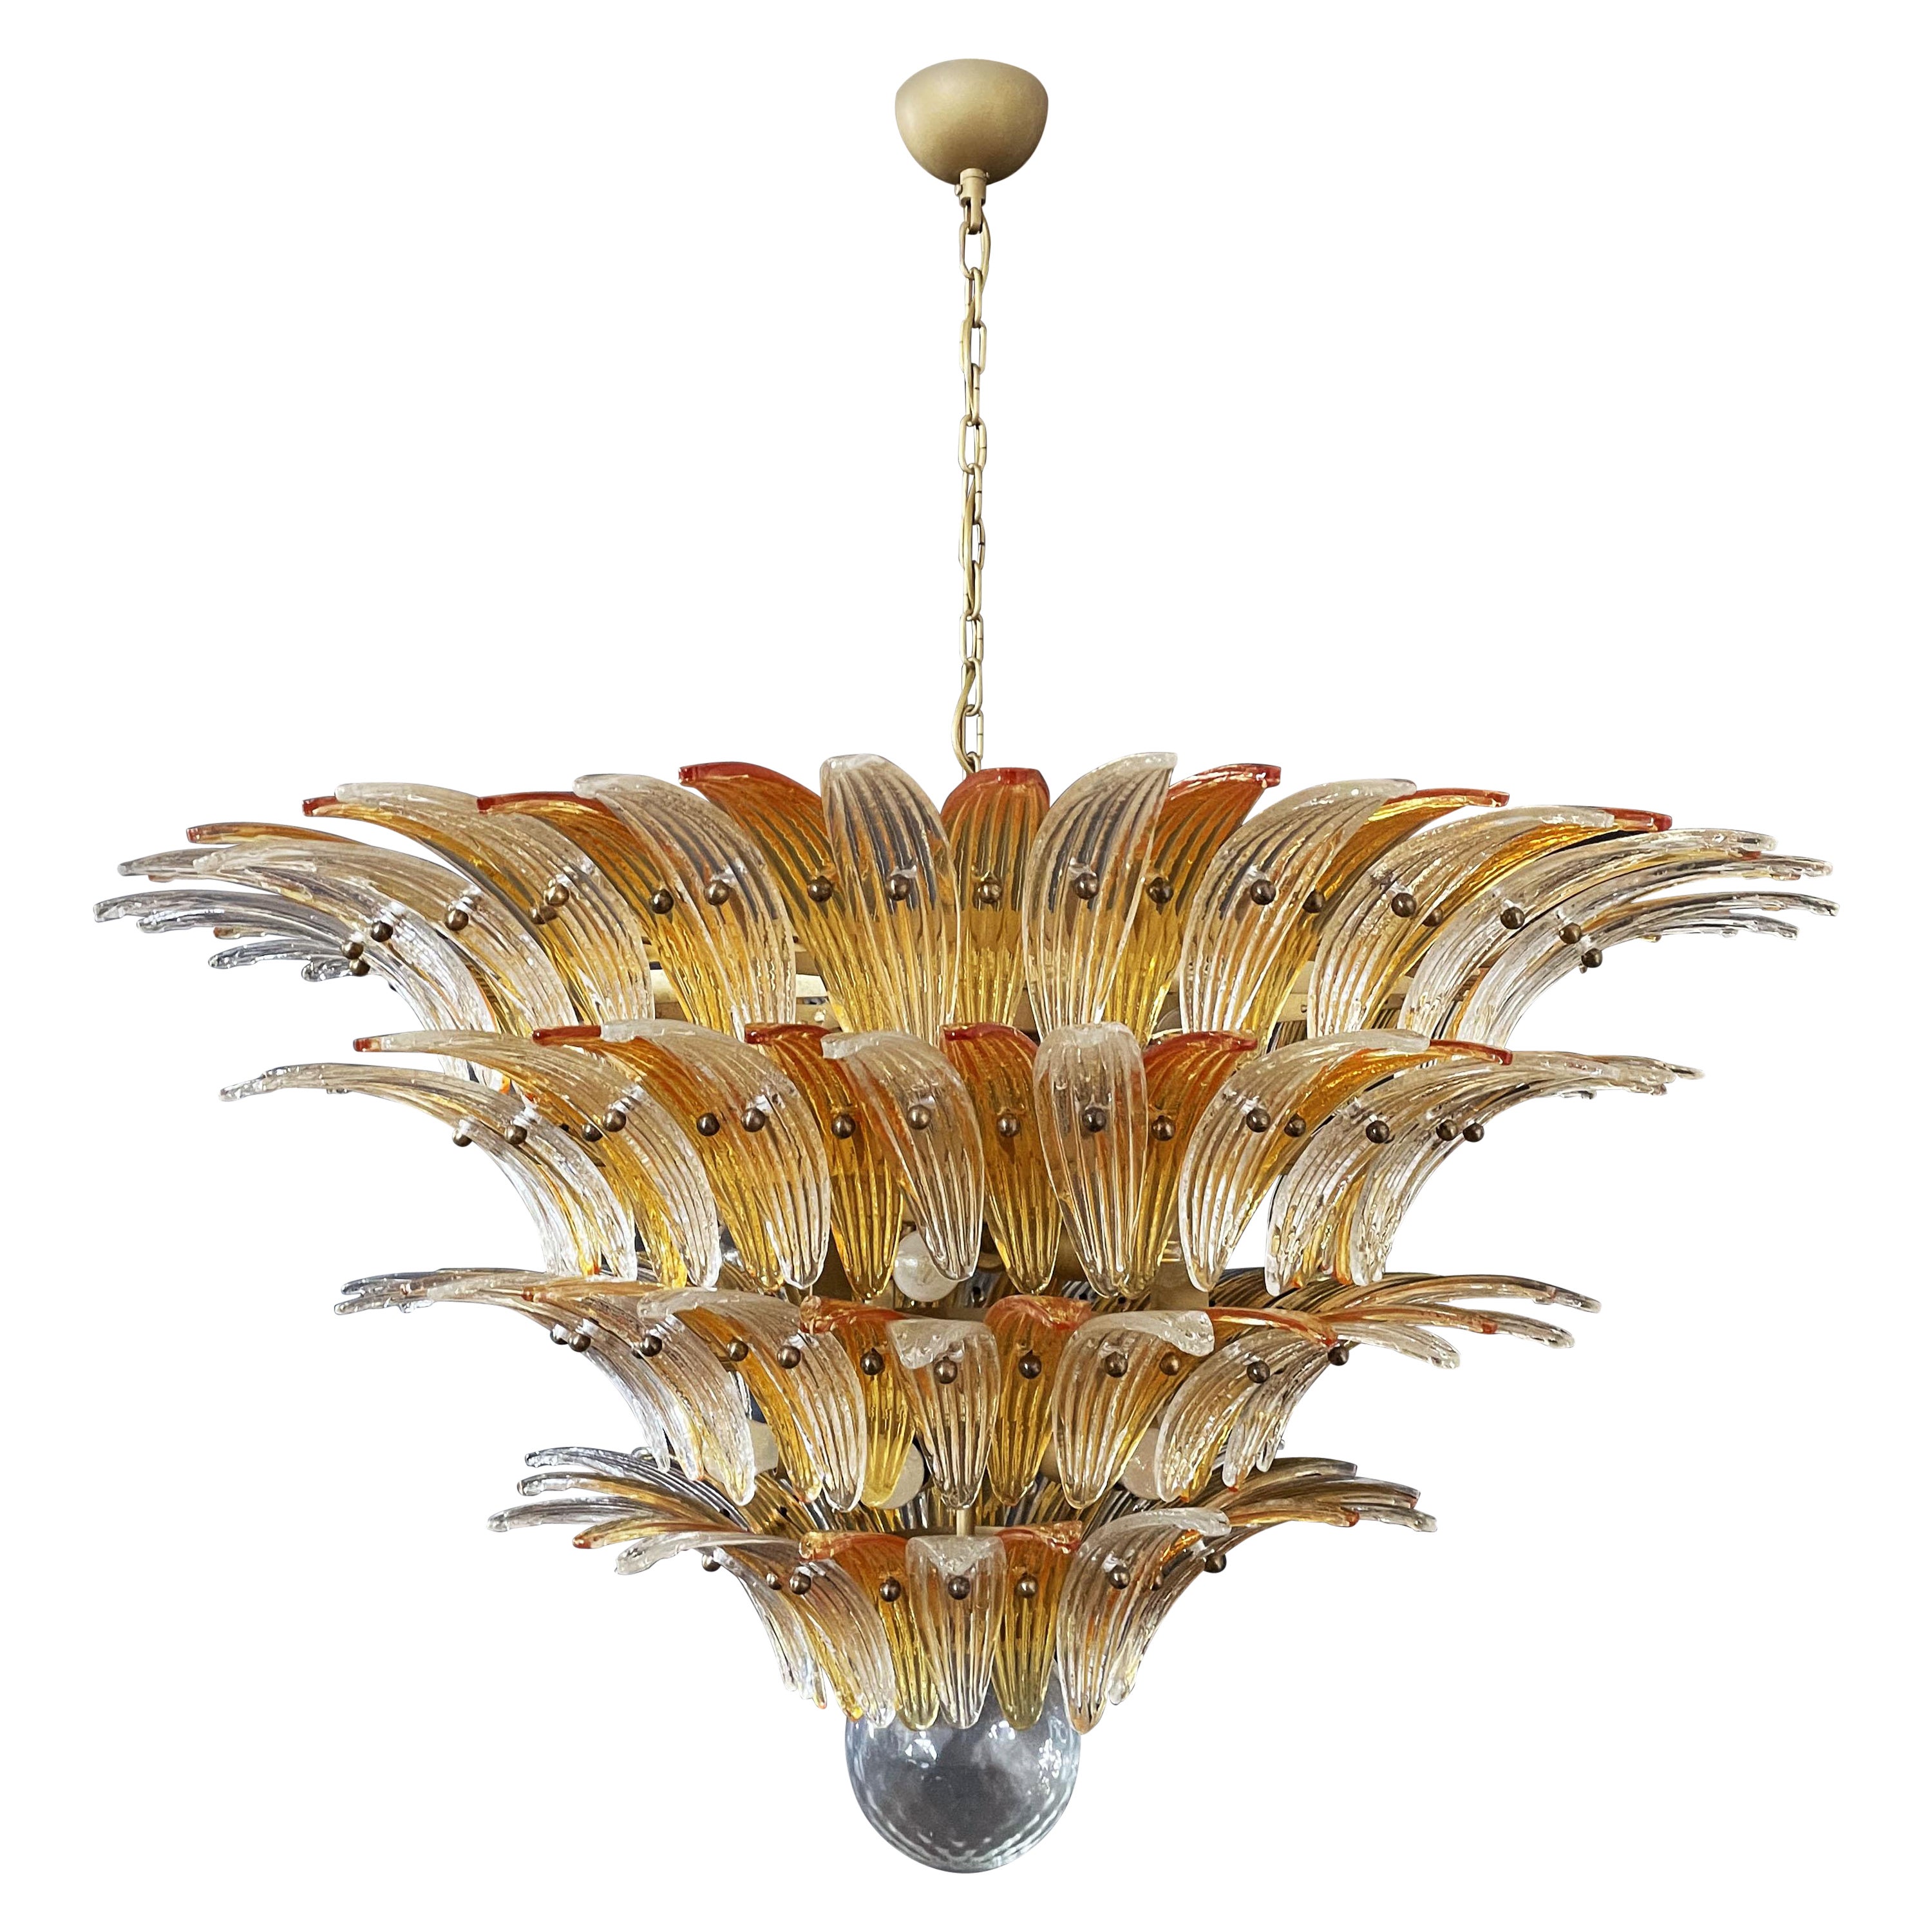 Palmette Ceiling Light, Four Levels, 163 Amber and Trasparent Glasses